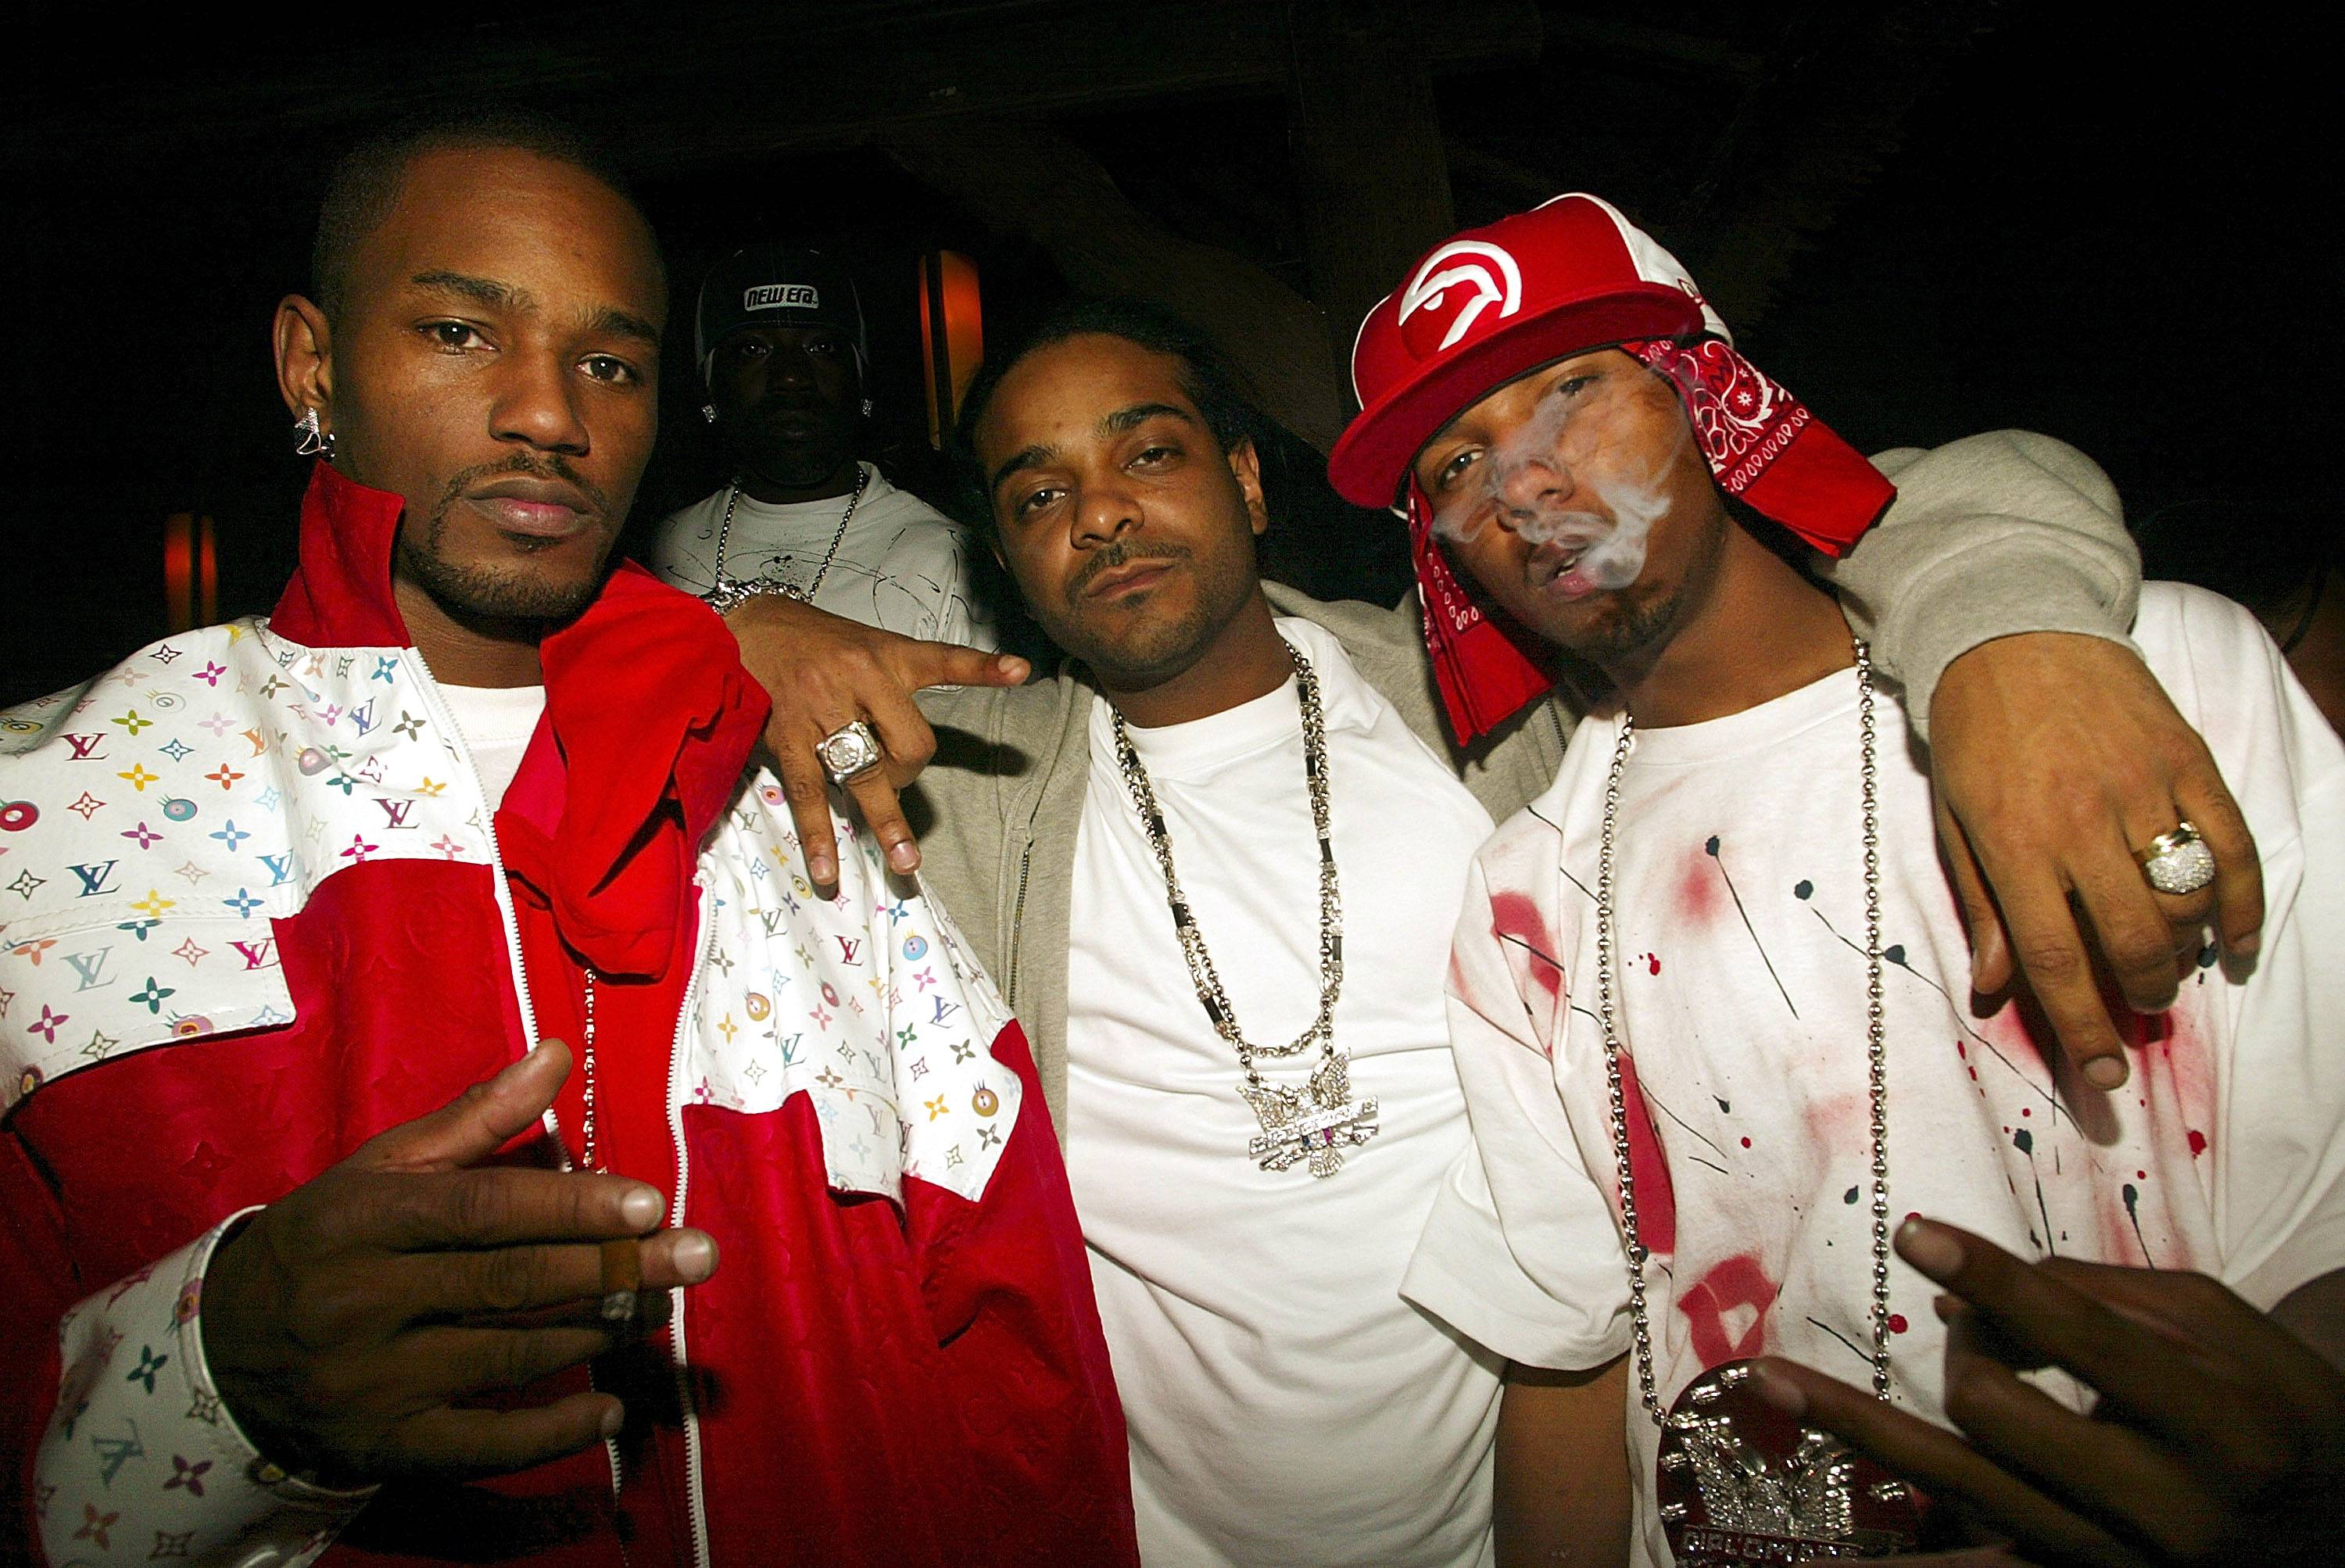 Ups & Downs - Its been a rocky road at times for the relationship between Cam'ron and his Diplomats capo, Jim Jones. But before the breakup–and the ensuing make up–the Harlem duo made beautiful music together. Cam and Jones are a historic hip hop duo.  (Photo by Scott Gries/Getty Images)